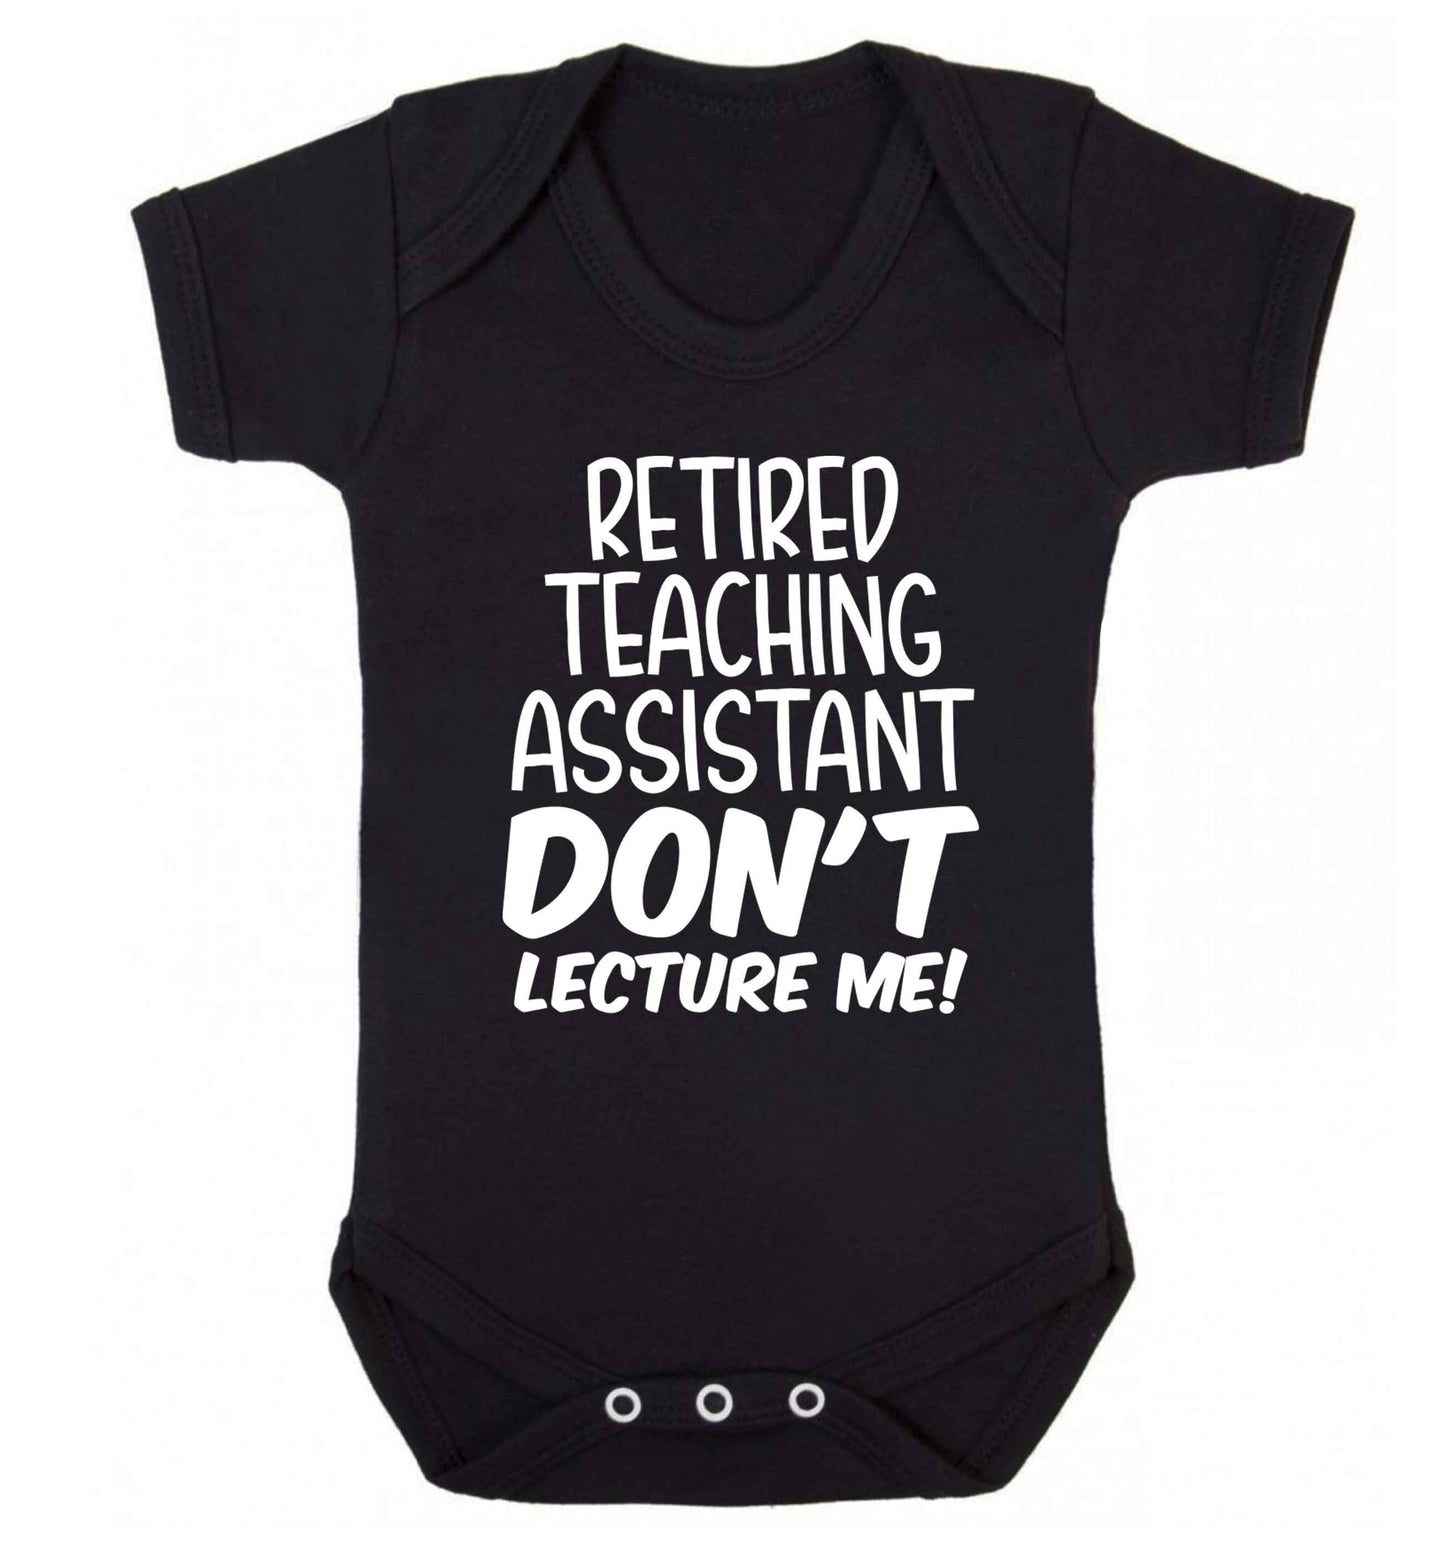 Retired teaching assistant don't lecture me Baby Vest black 18-24 months